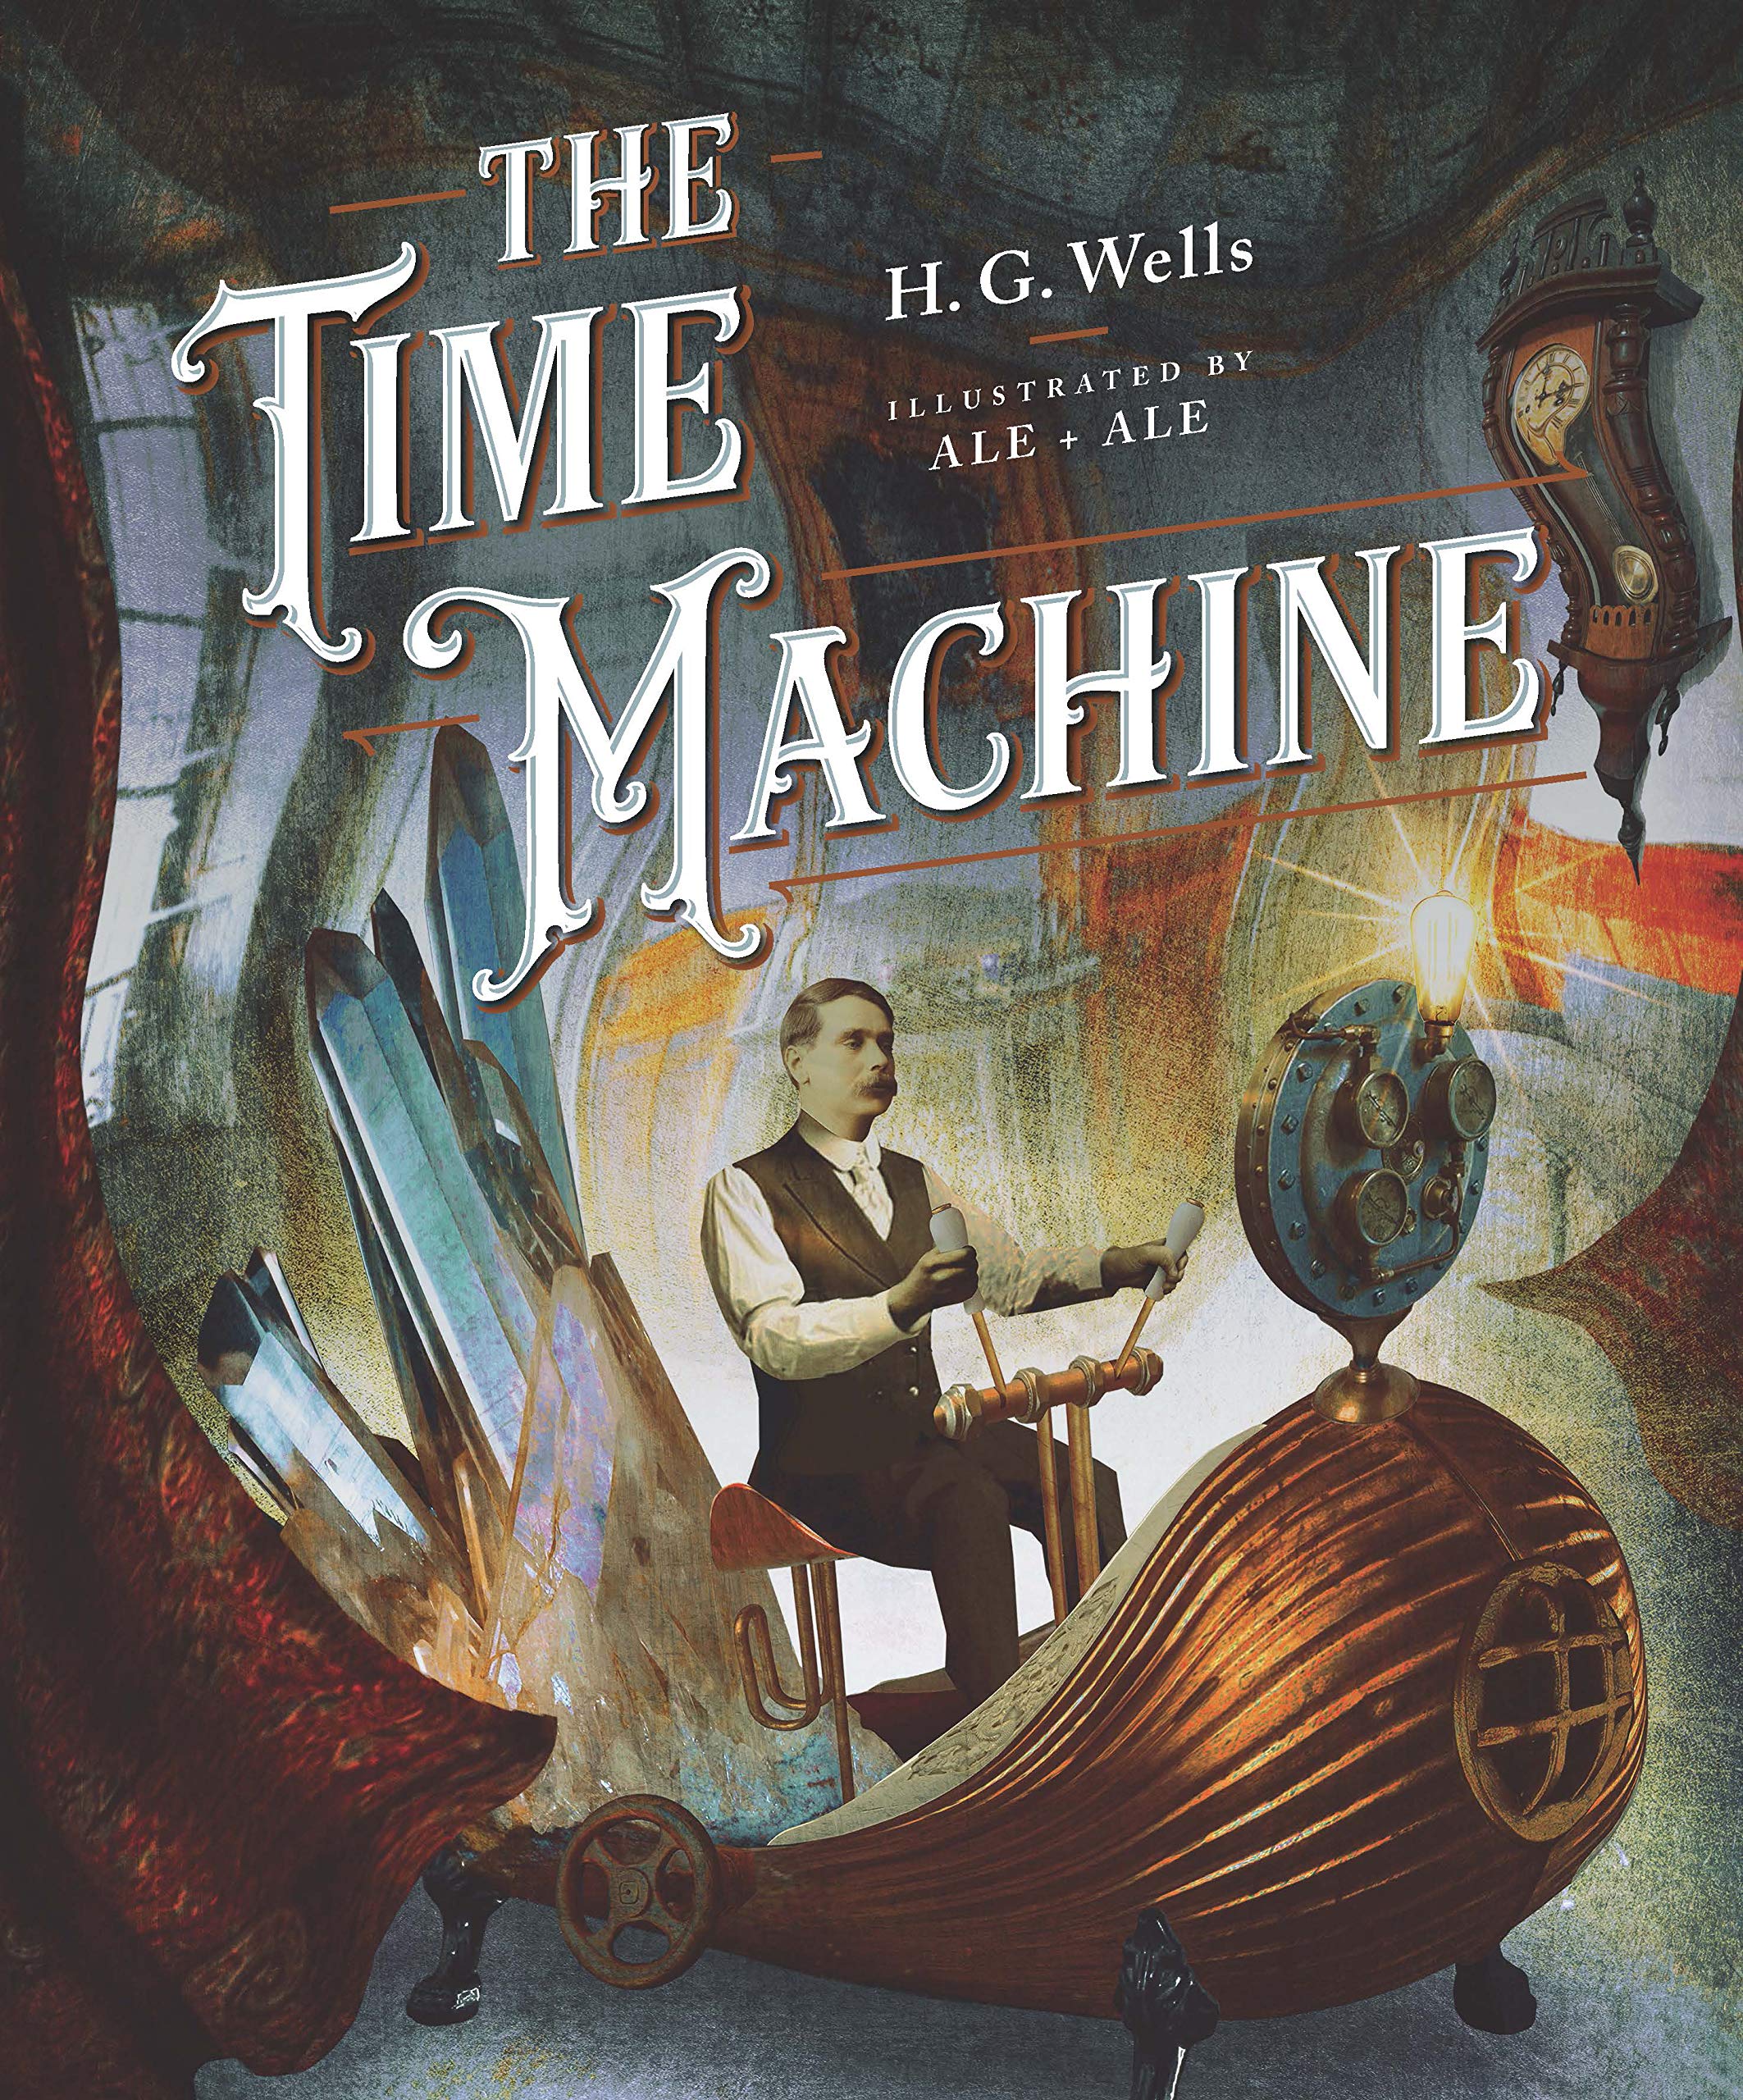 time machine book review